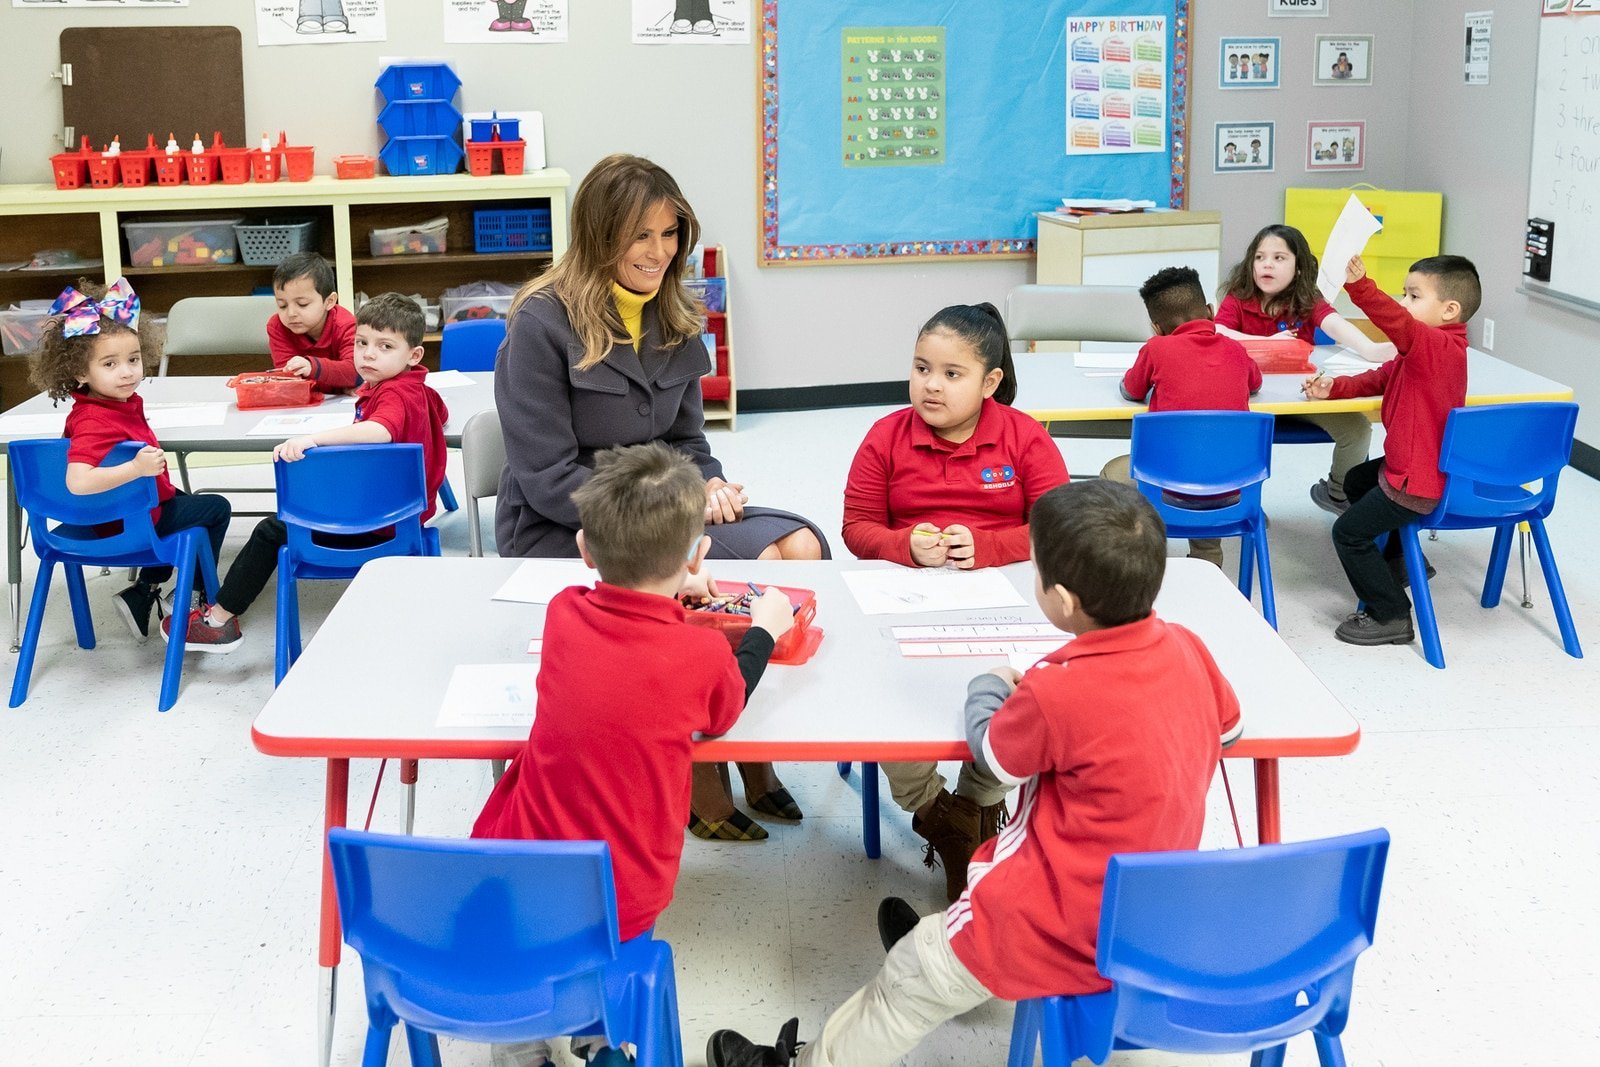 Melania trump attended school in Tulsa, becoming the first President’s wife, who came to the city on an official visit